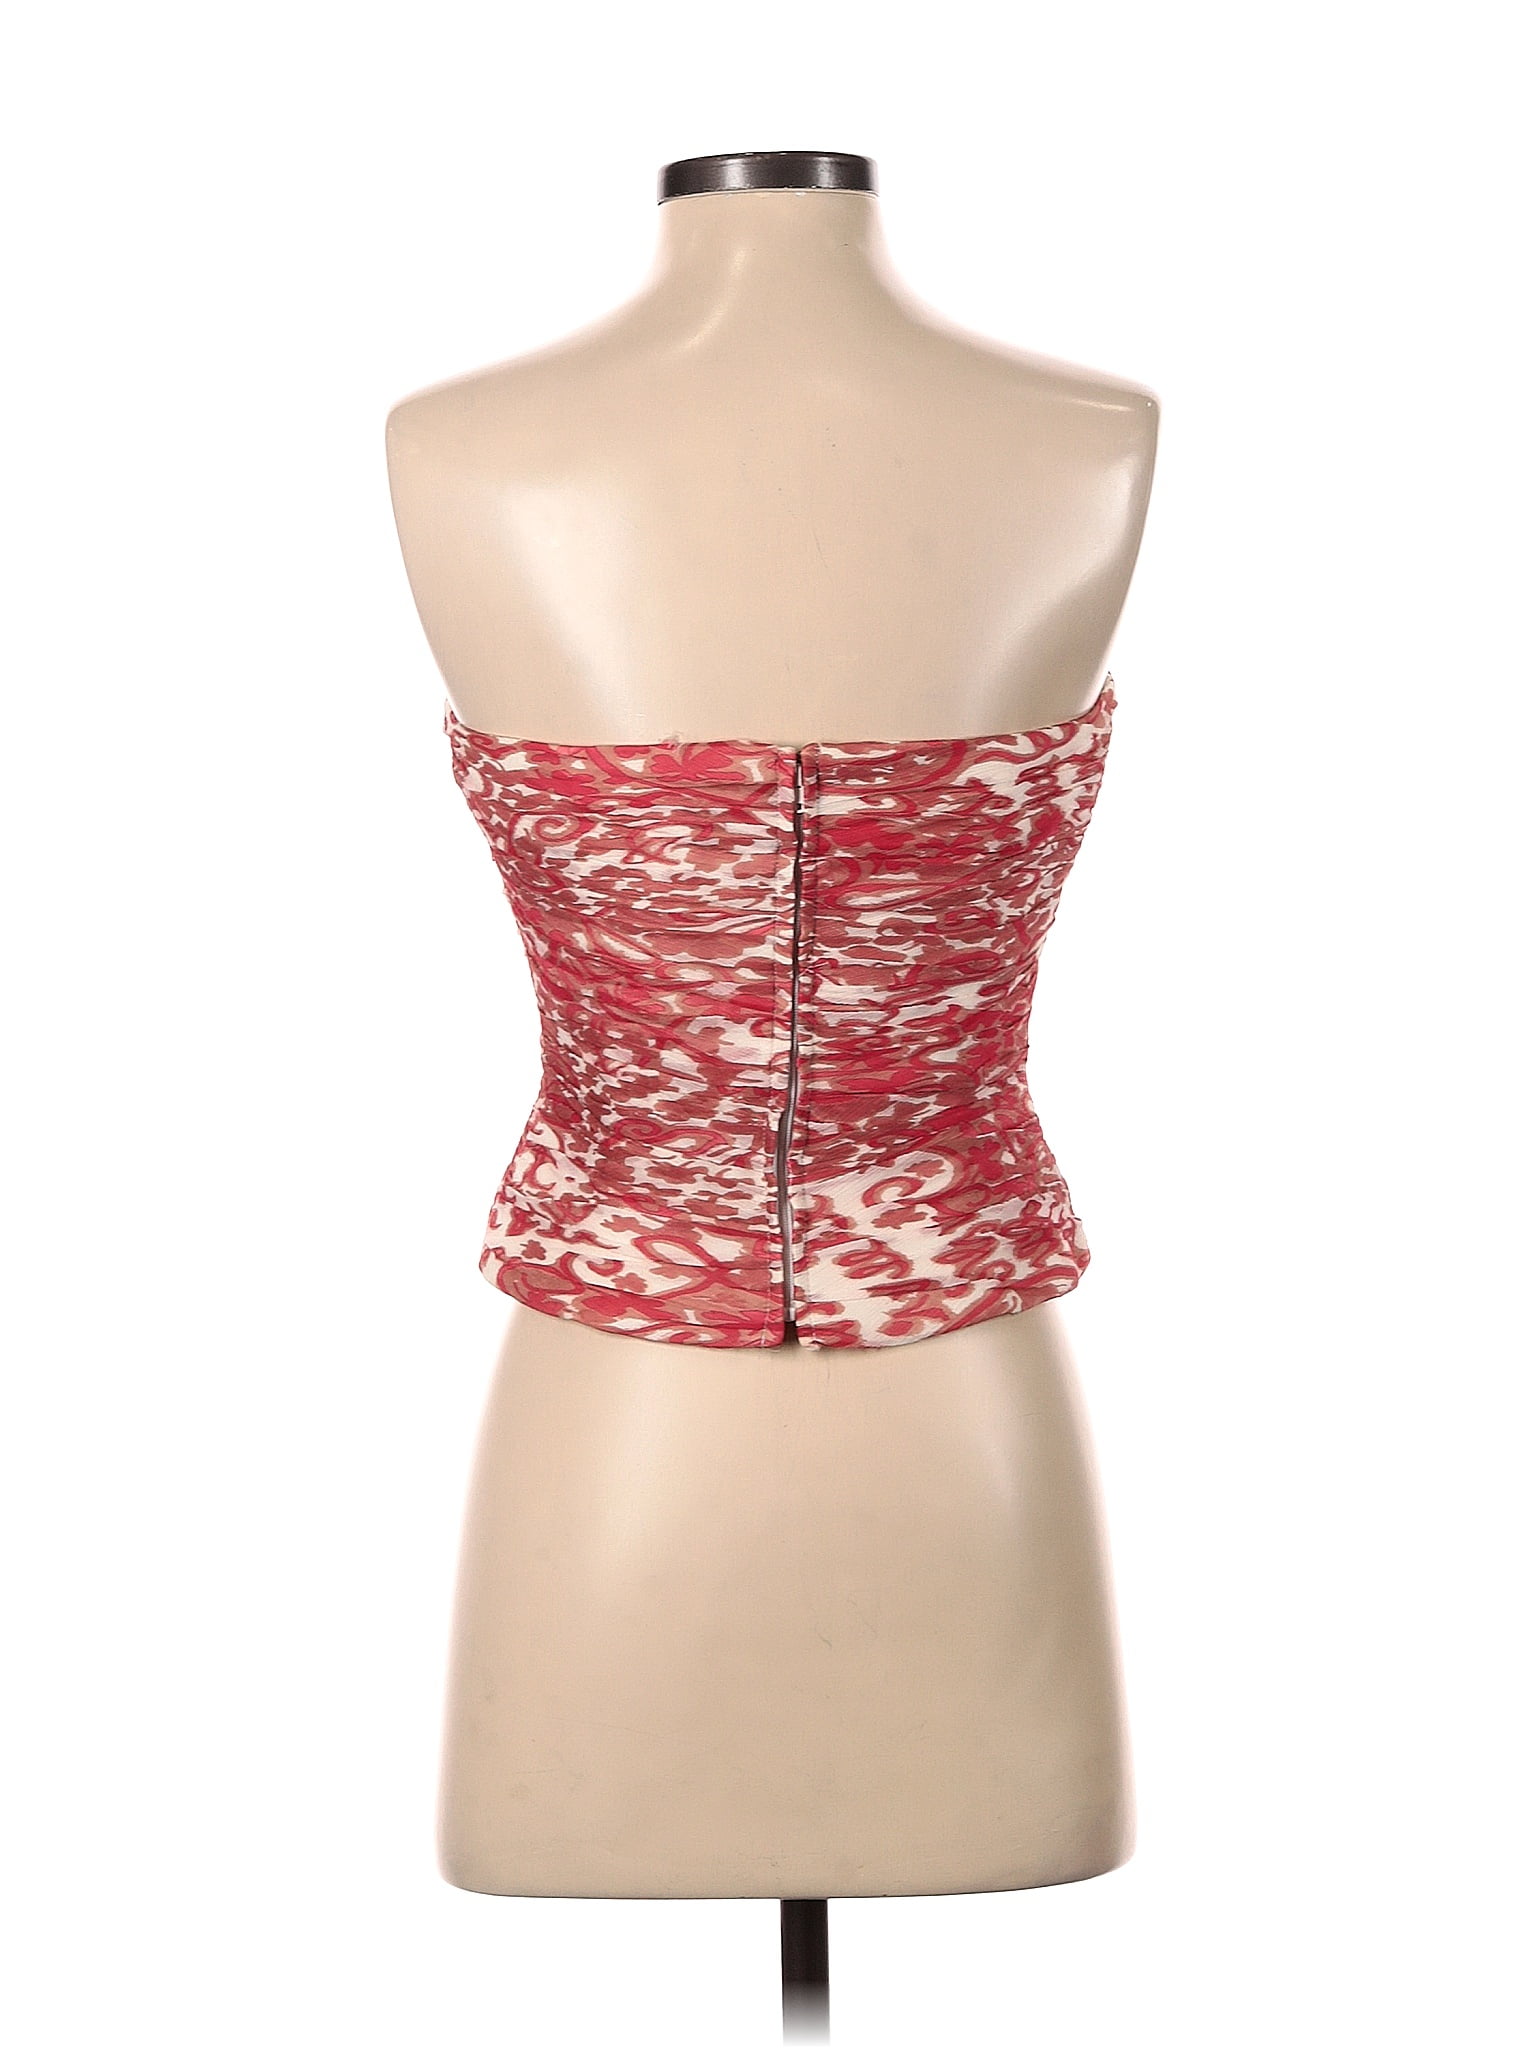 Rickie Freeman for Teri Jon Suits 100% Silk Red Tube Top Size 6 - 68% off